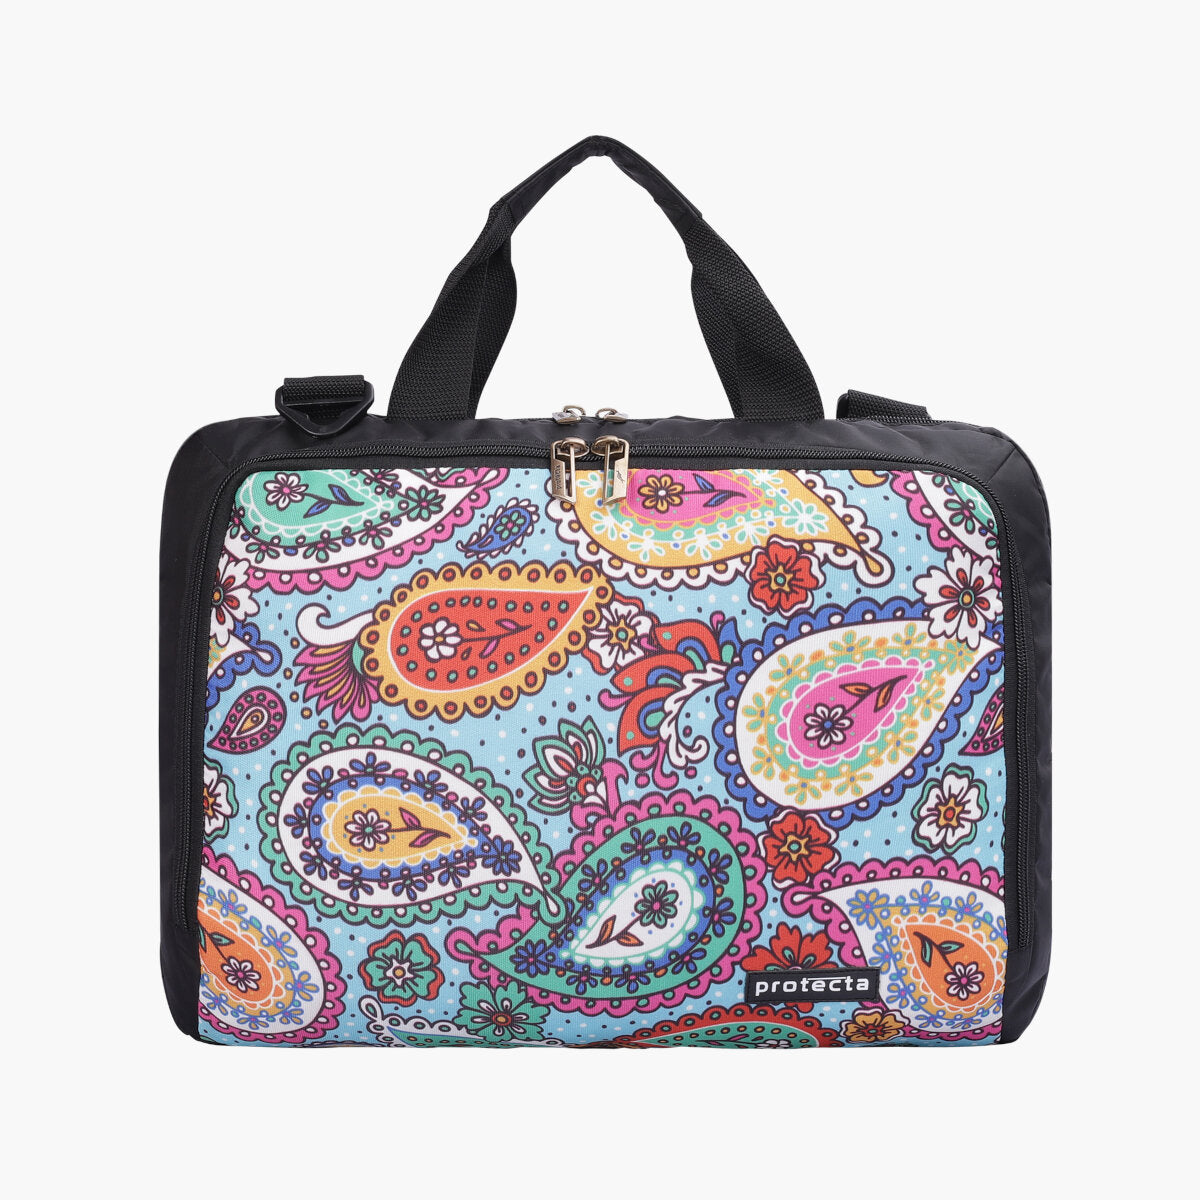 Attractive Paisley Print | Protecta The Professional Office Laptop Bag - Main